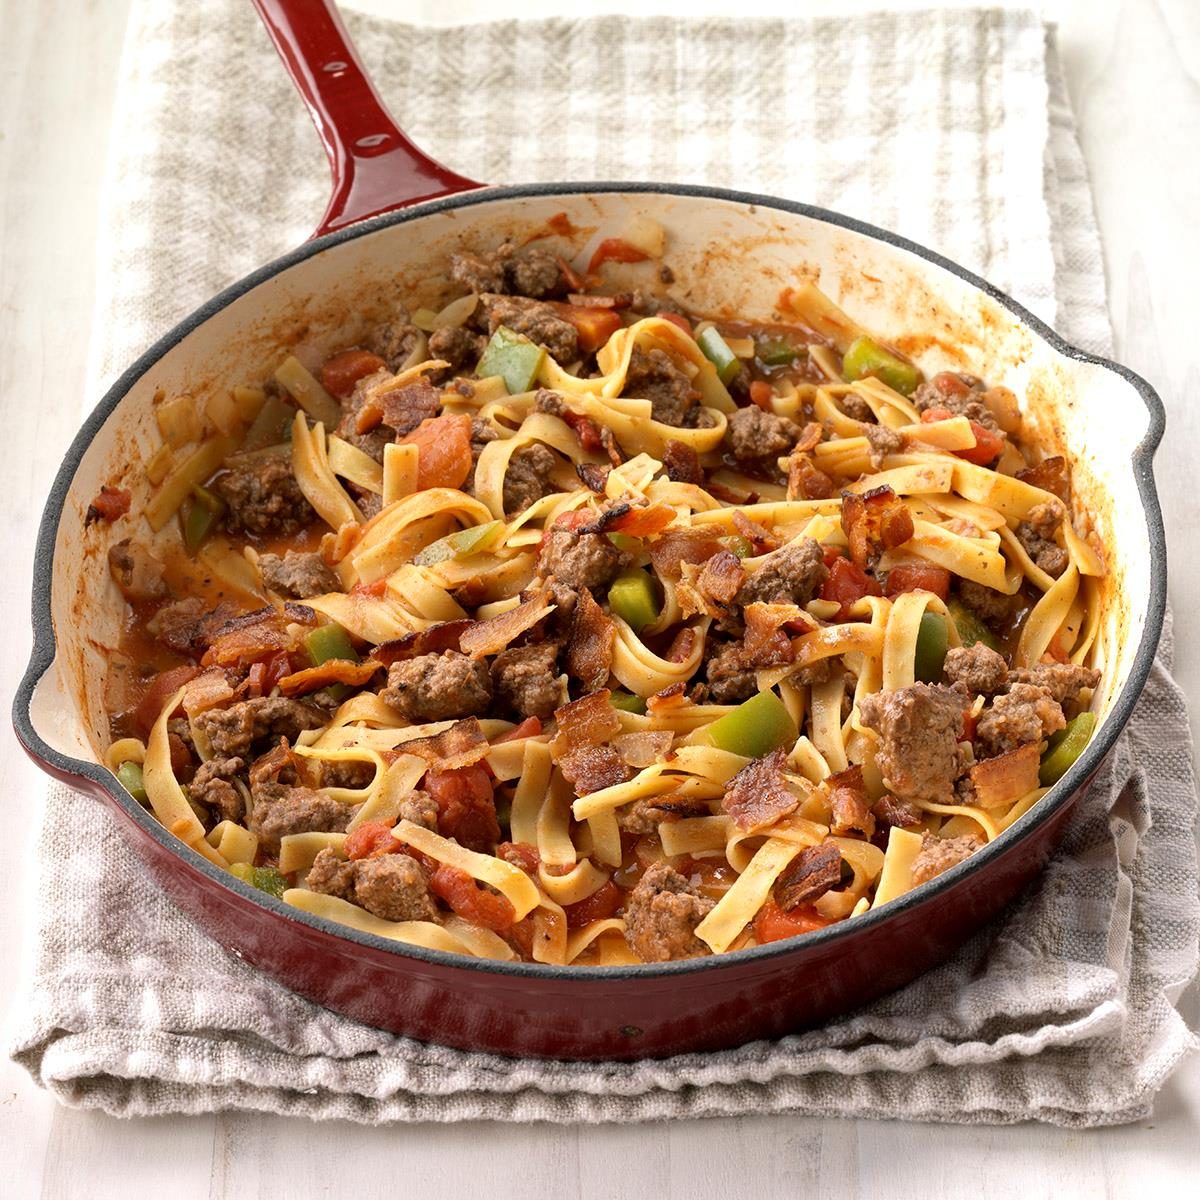 Spanish Noodles And Ground Beef Exps Sdfm18 42886 C10 10 5b 11